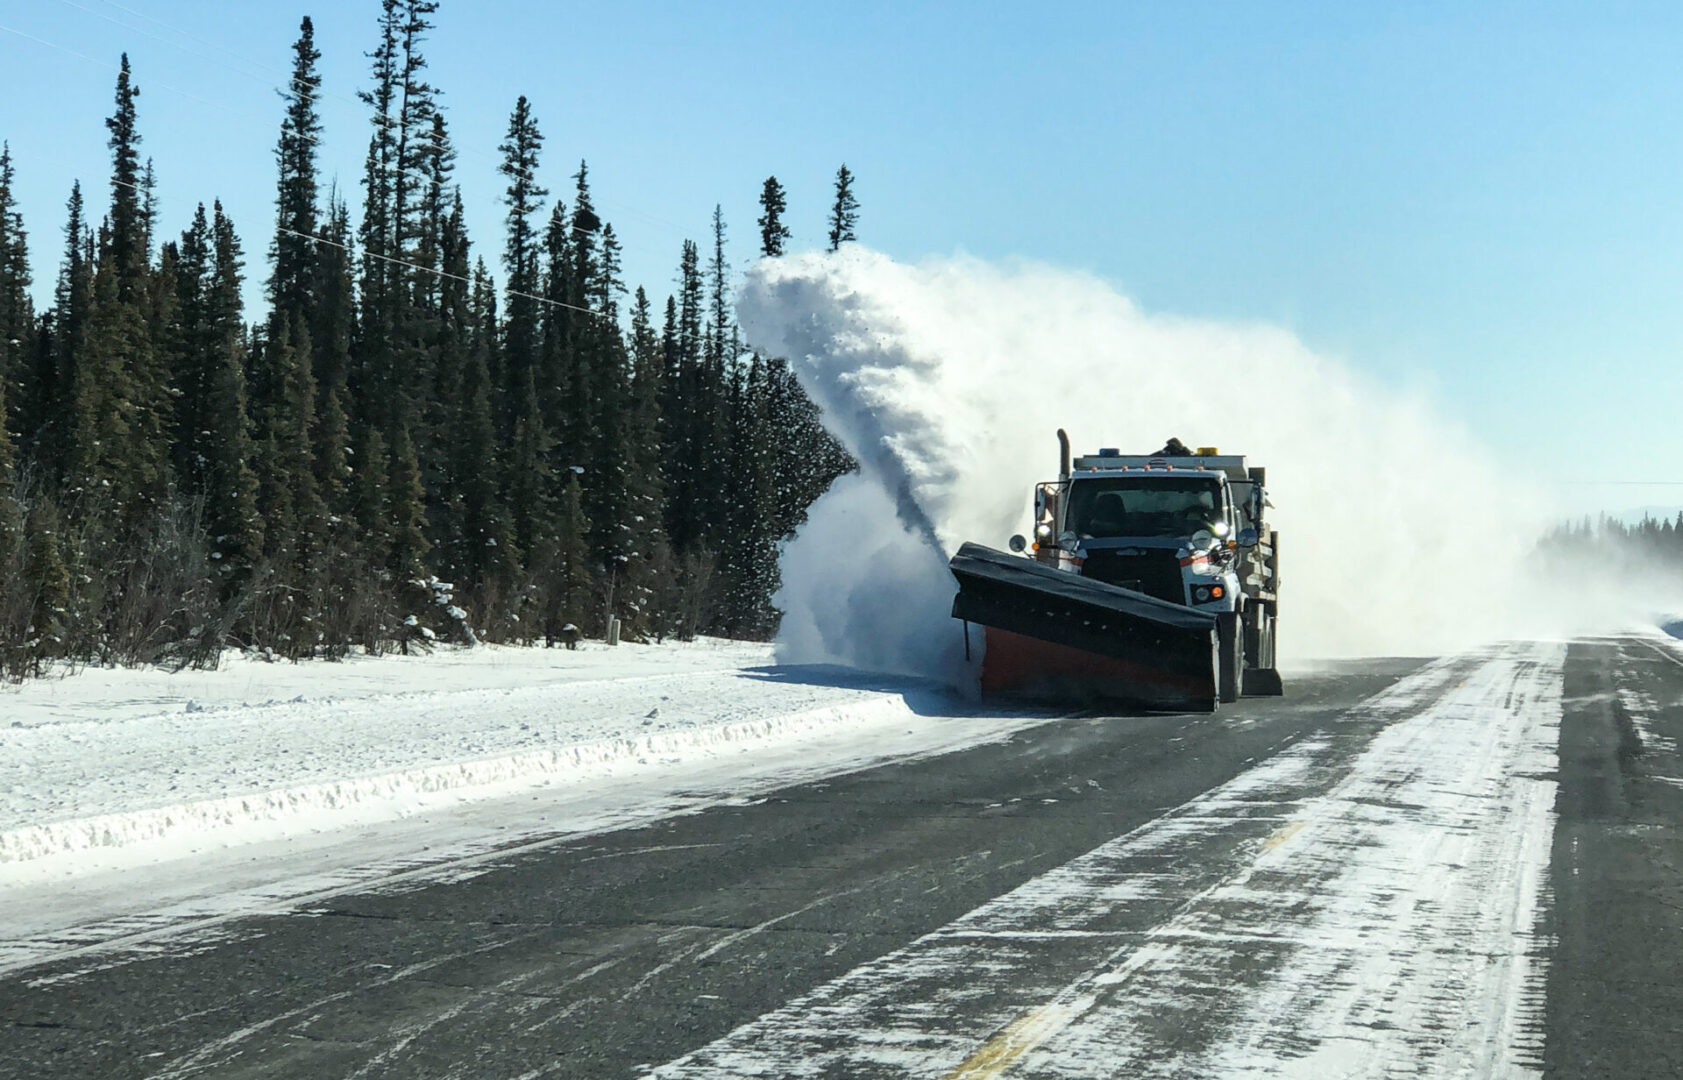 Snow plow clearing snow from a mountain road